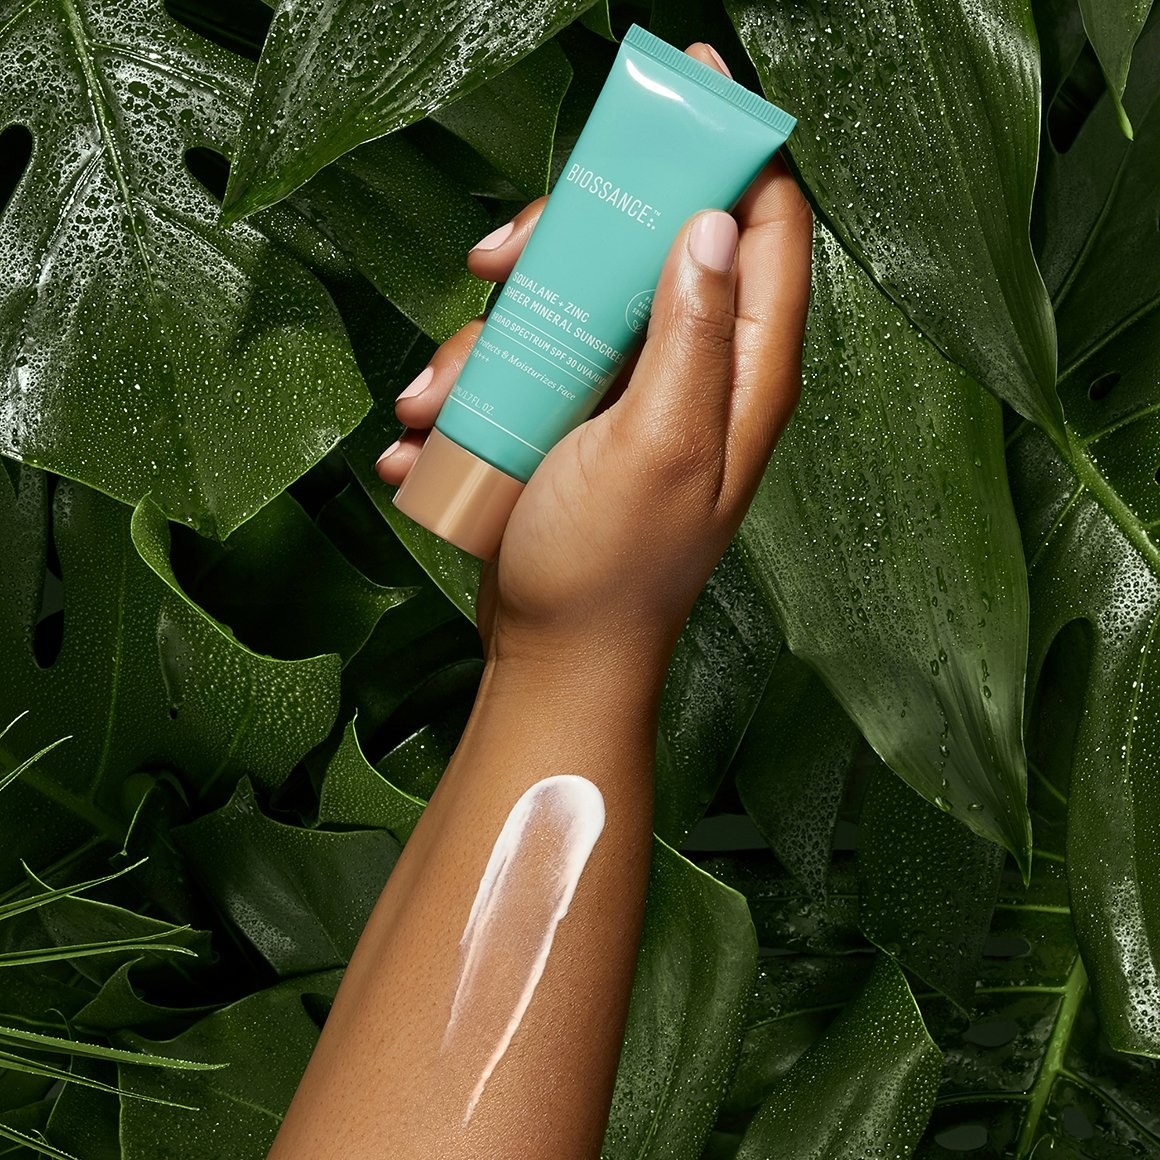 the tube, with the sunscreen swatched on an arm 